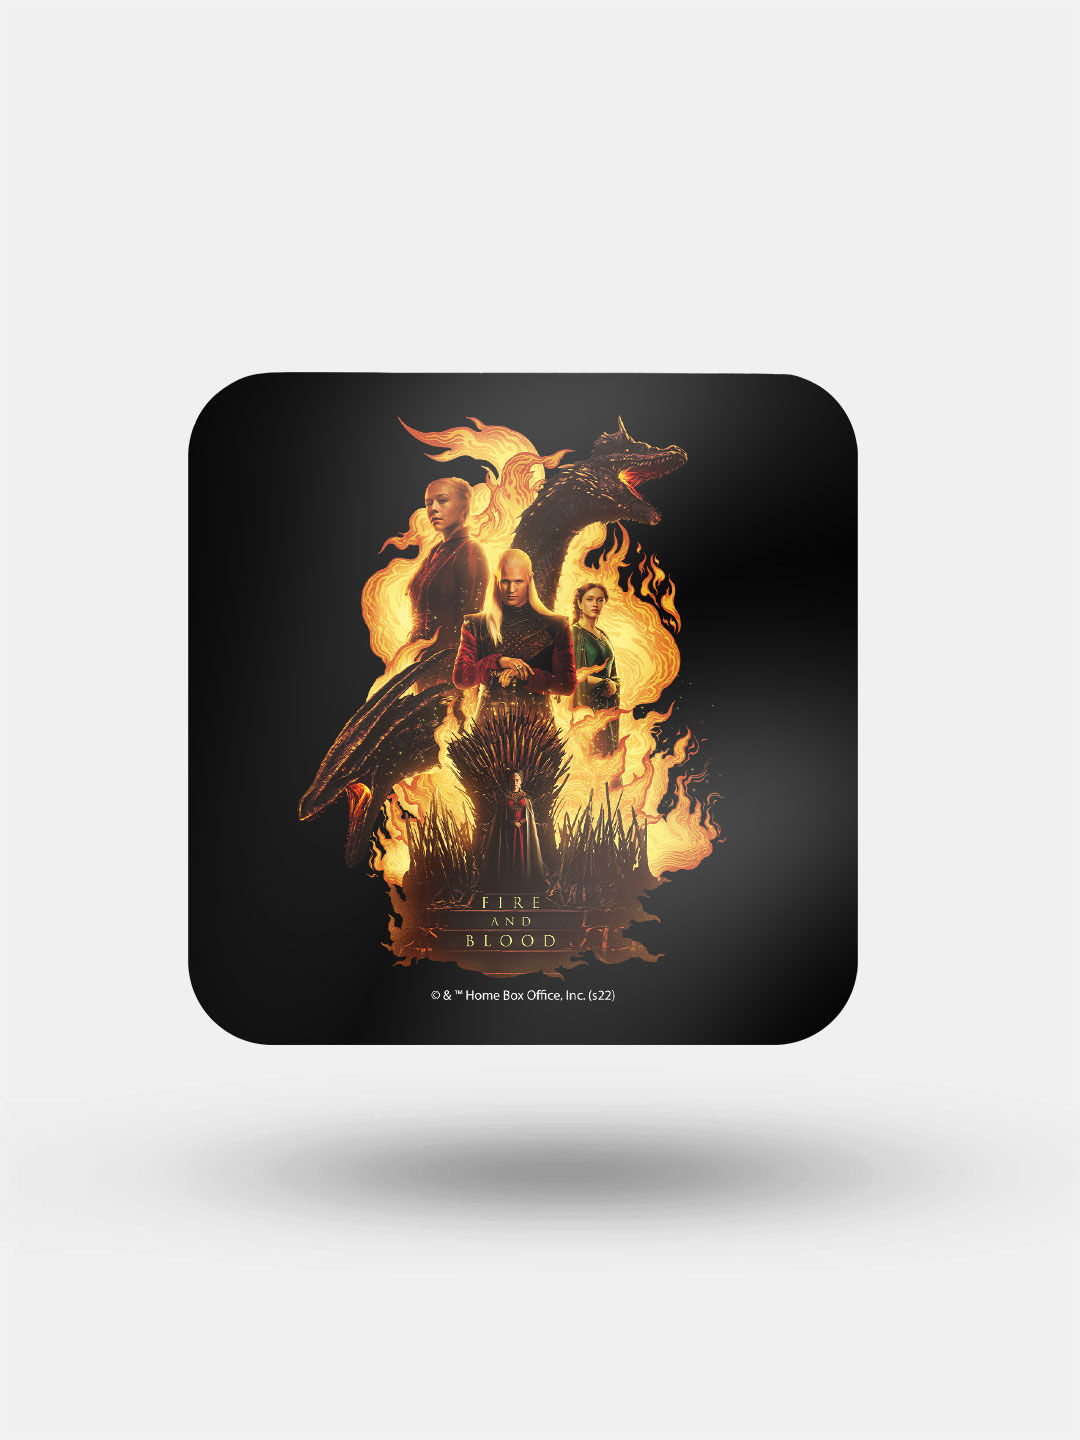 Buy HOD Fire and blood team Multi - 10 X 10 (cm) Square Coasters Coasters Online